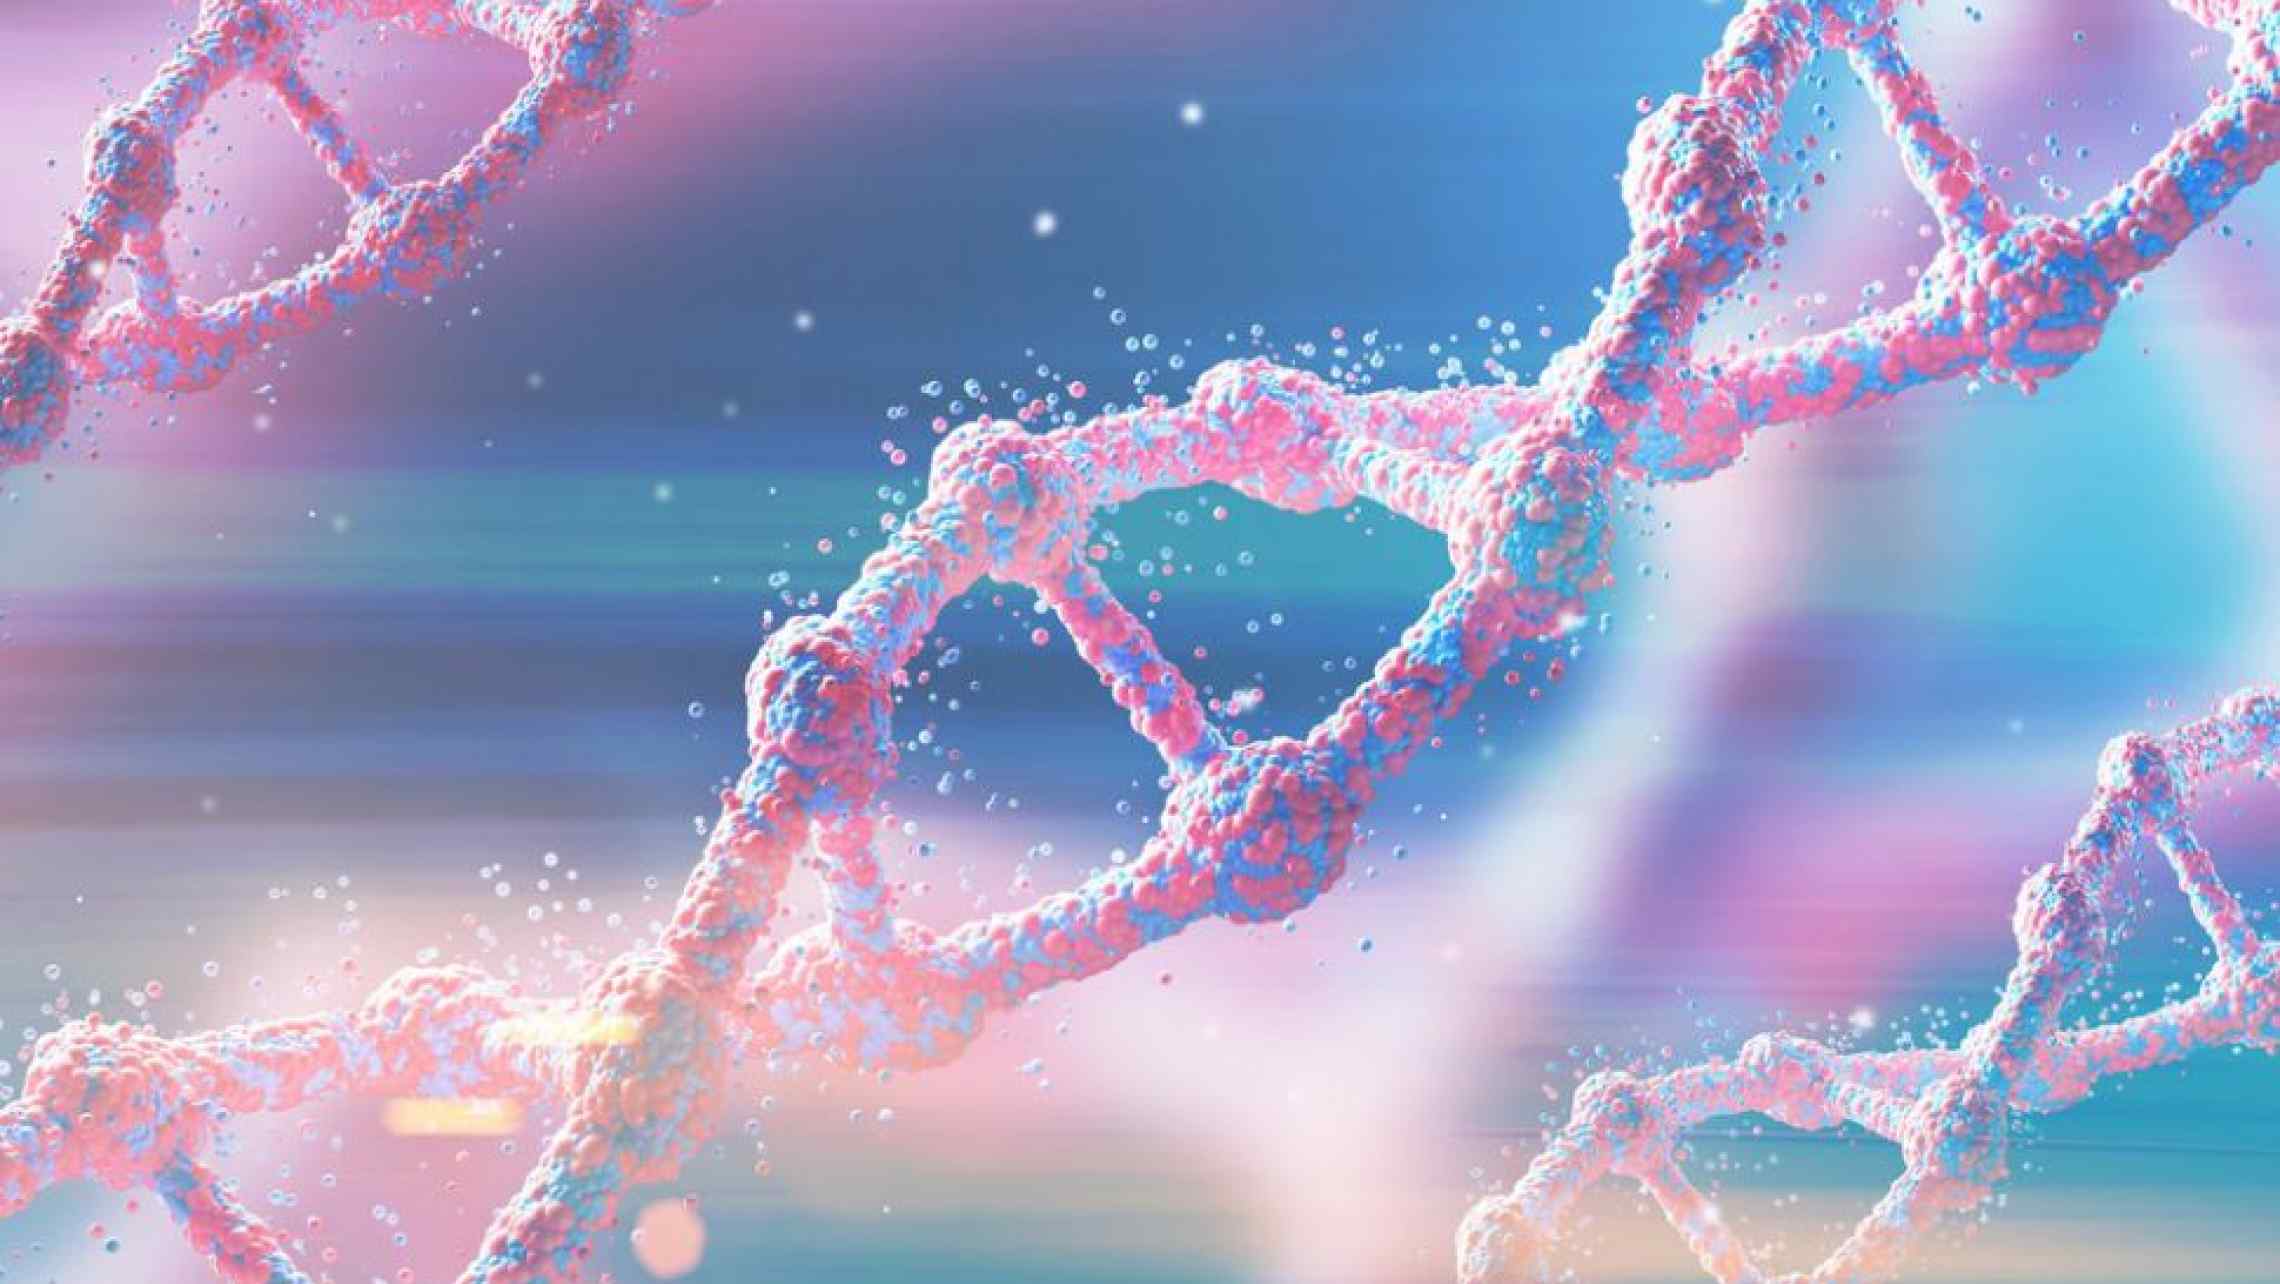 DNA JUST ONE OF MORE THAN 1 MILLION POSSIBLE GENETIC MOLECULES, SCIENTISTS FIND